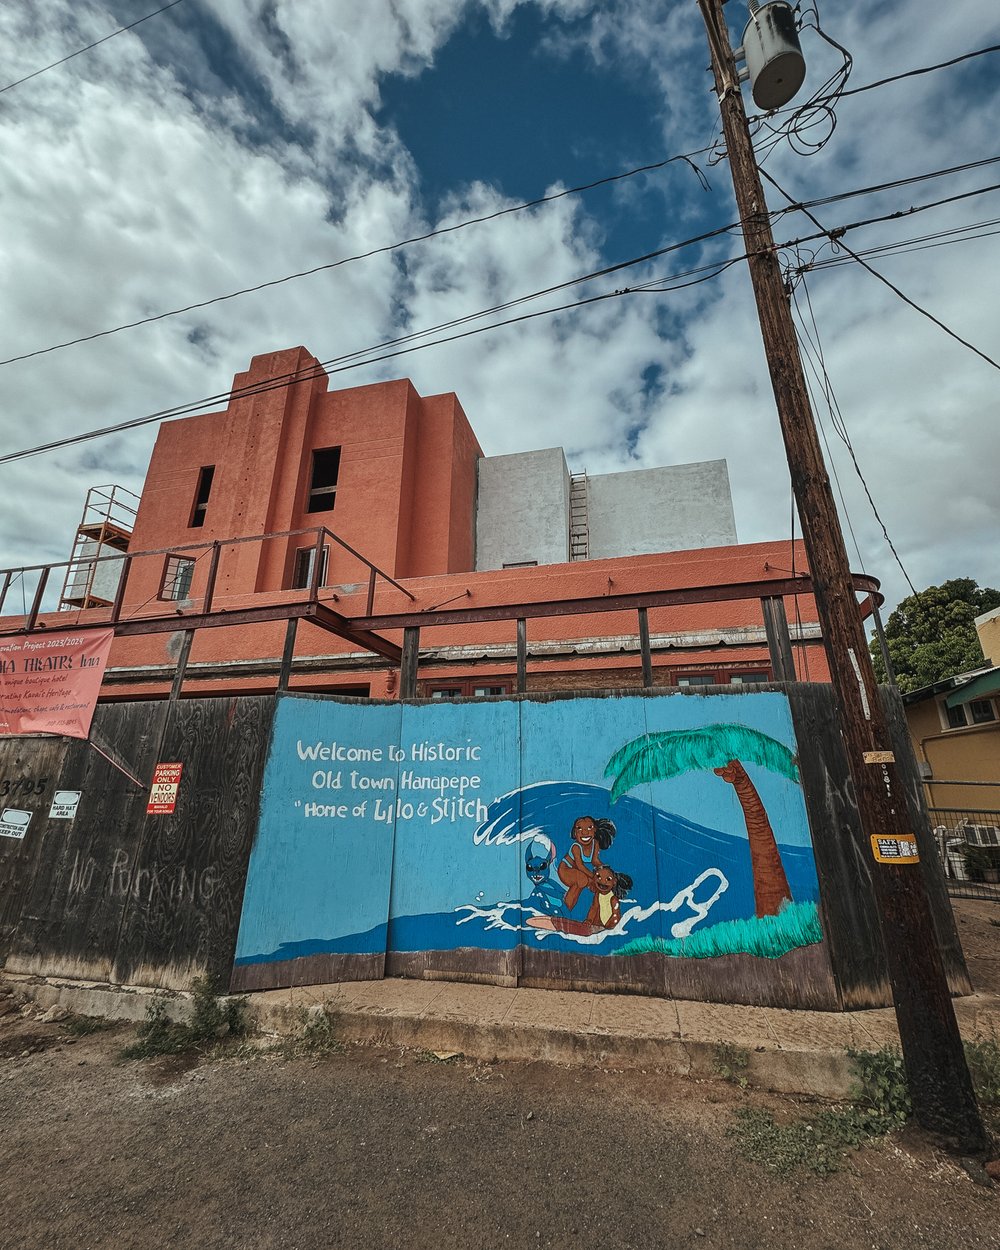   Lilo &amp; Stitch mural  in Hanapepe Town, which inspired the movie setting 